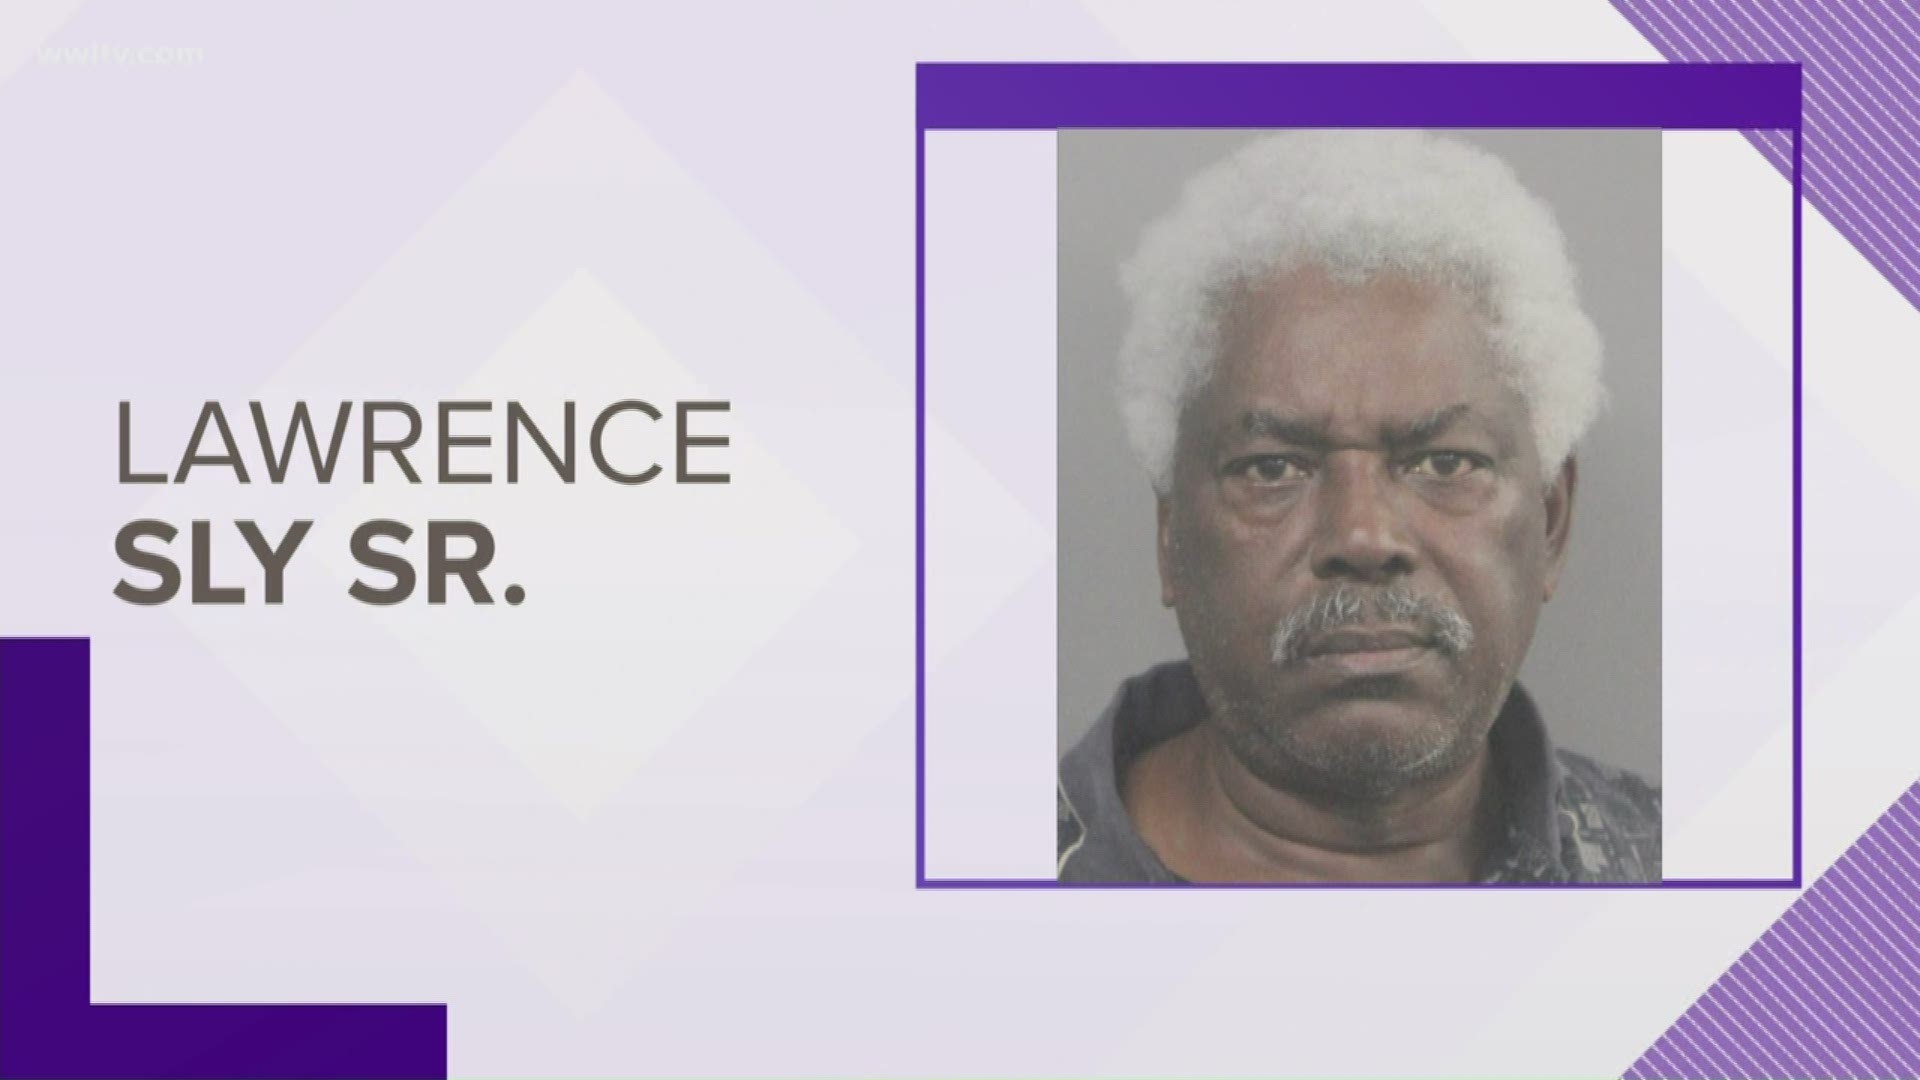 A man was arrested Monday after he allegedly shot and killed his next door neighbor in Harvey the night before, Jefferson Parish officials said.